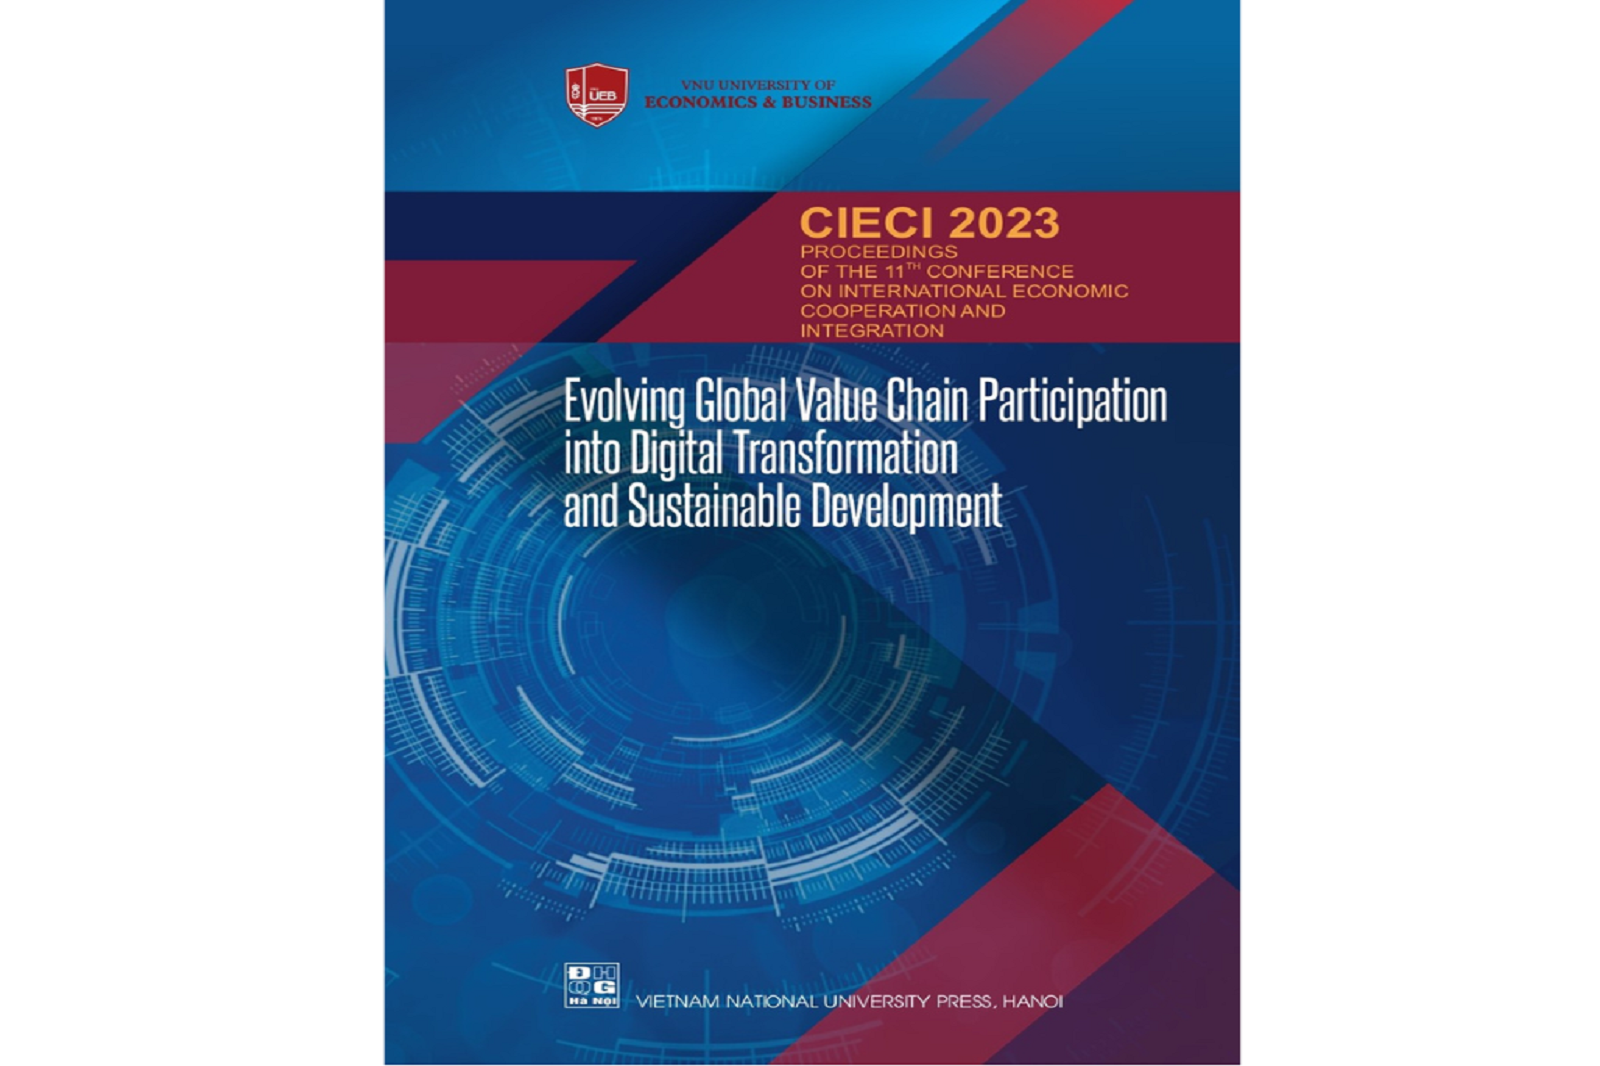 Proceedings of the 11th Conference on International Economic Cooperation and Integration (CIECI 2023): Evolving Global Value Chain Participation into Digital Transformation and Sustainable Development